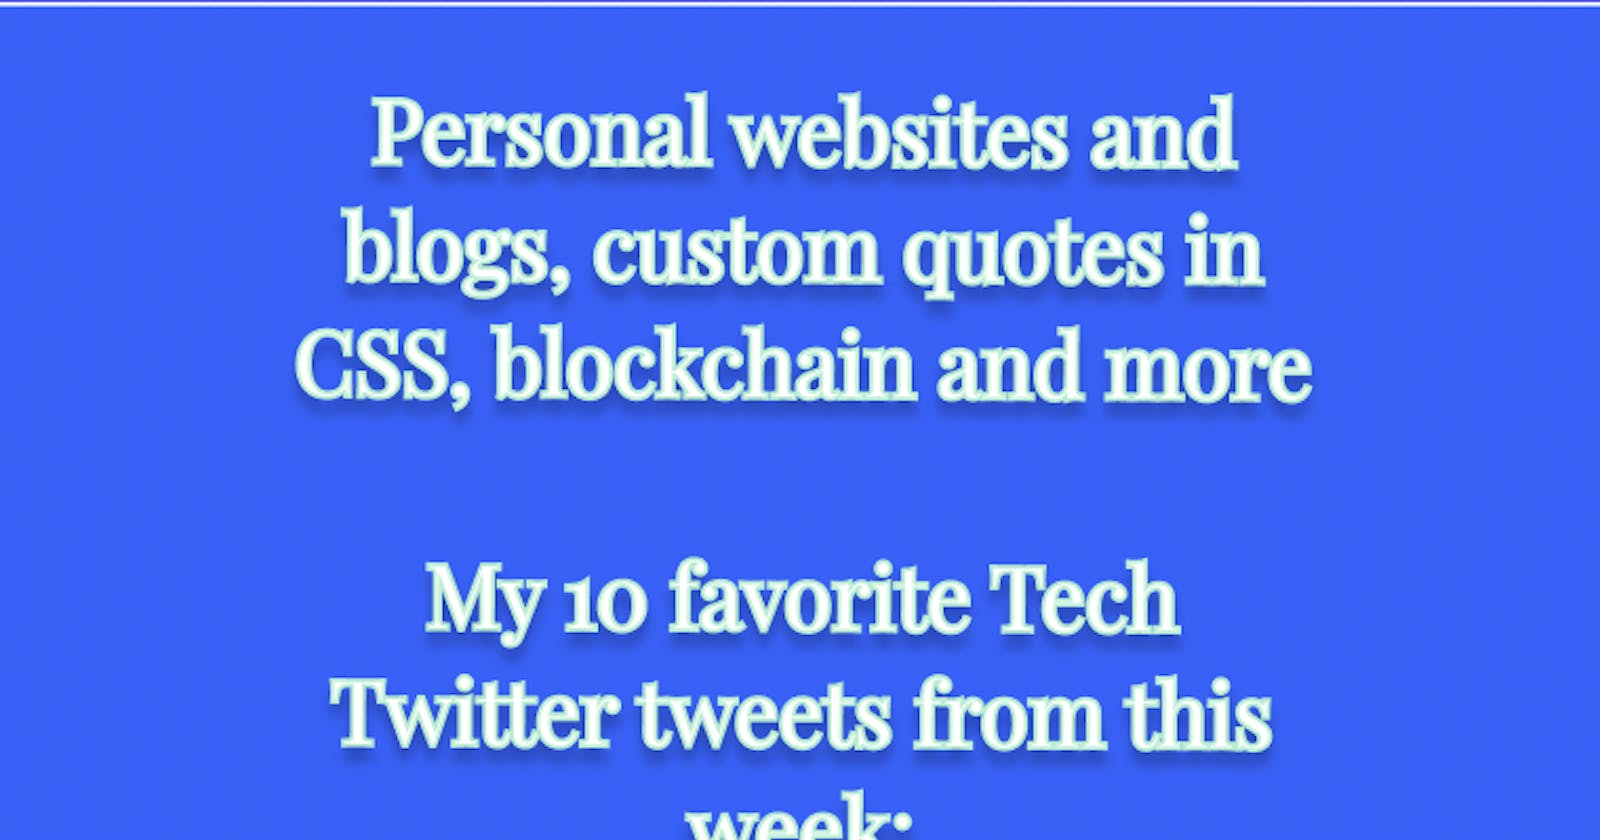 Personal websites and blogs, custom quotes in CSS, blockchain, and more

My 10 favorite Tech Twitter tweets from this week: